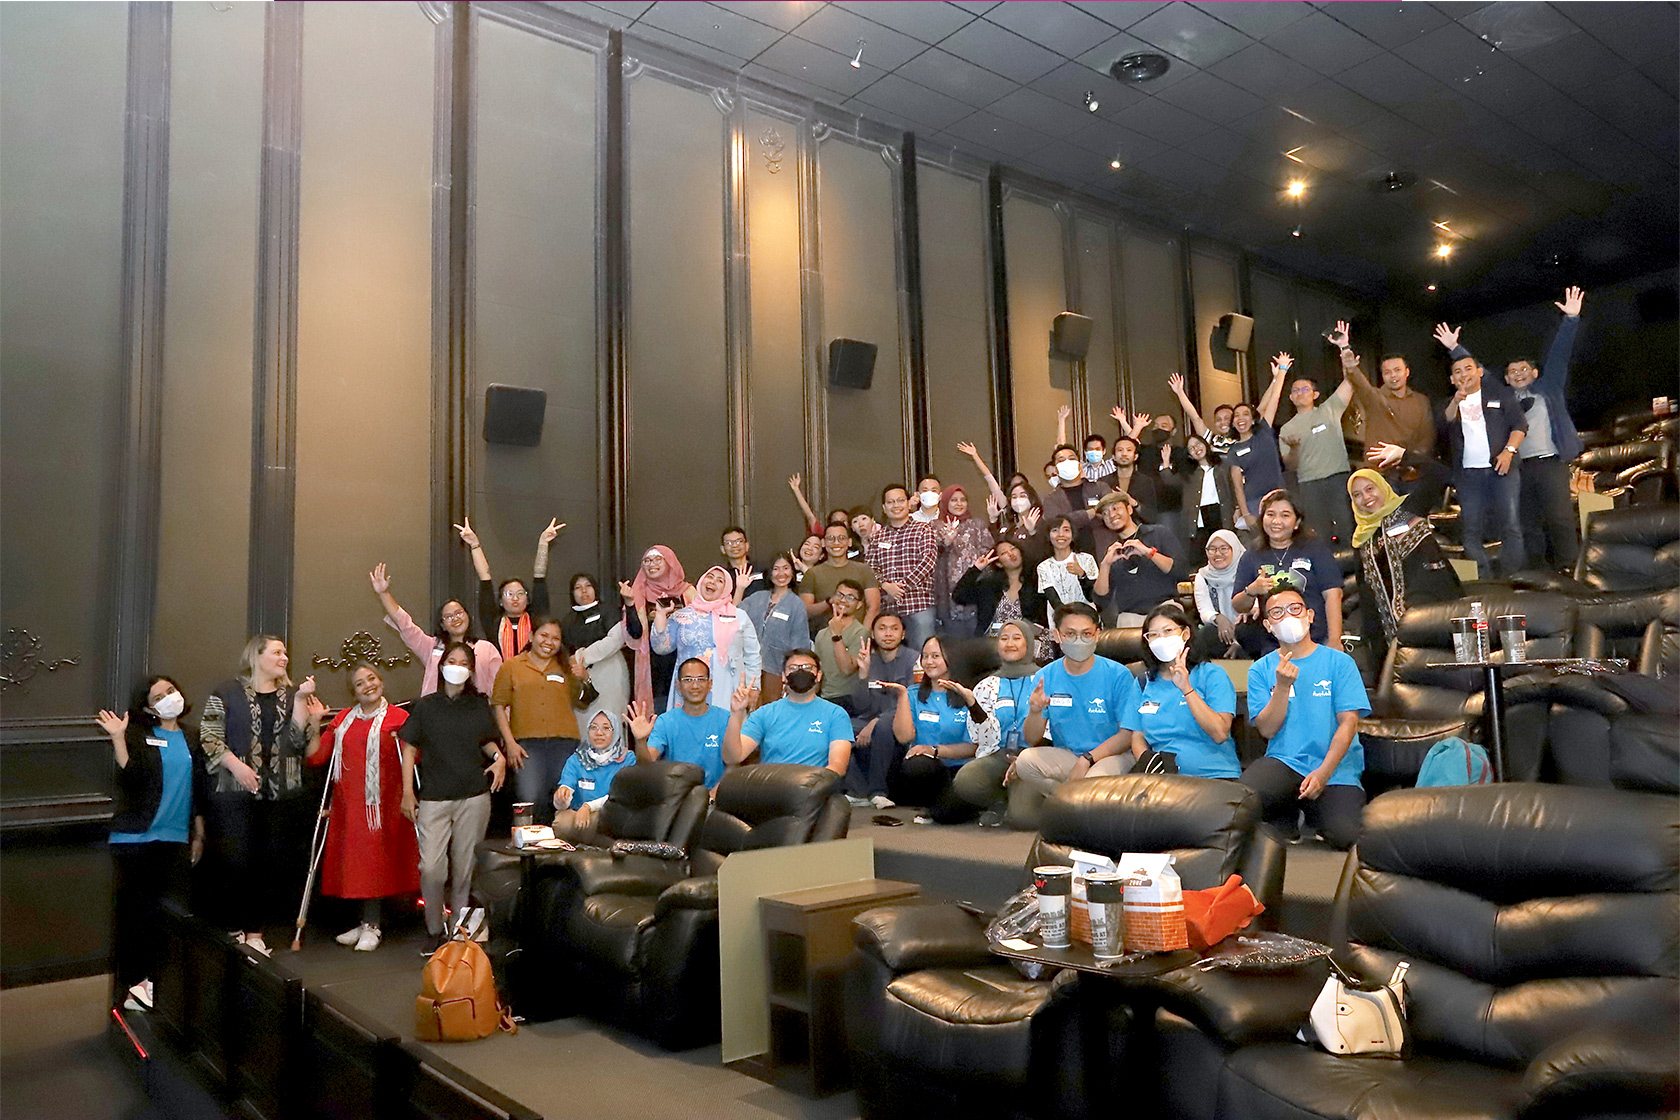 All "Nobar" participants and the event committee took a picture before the film screening started.